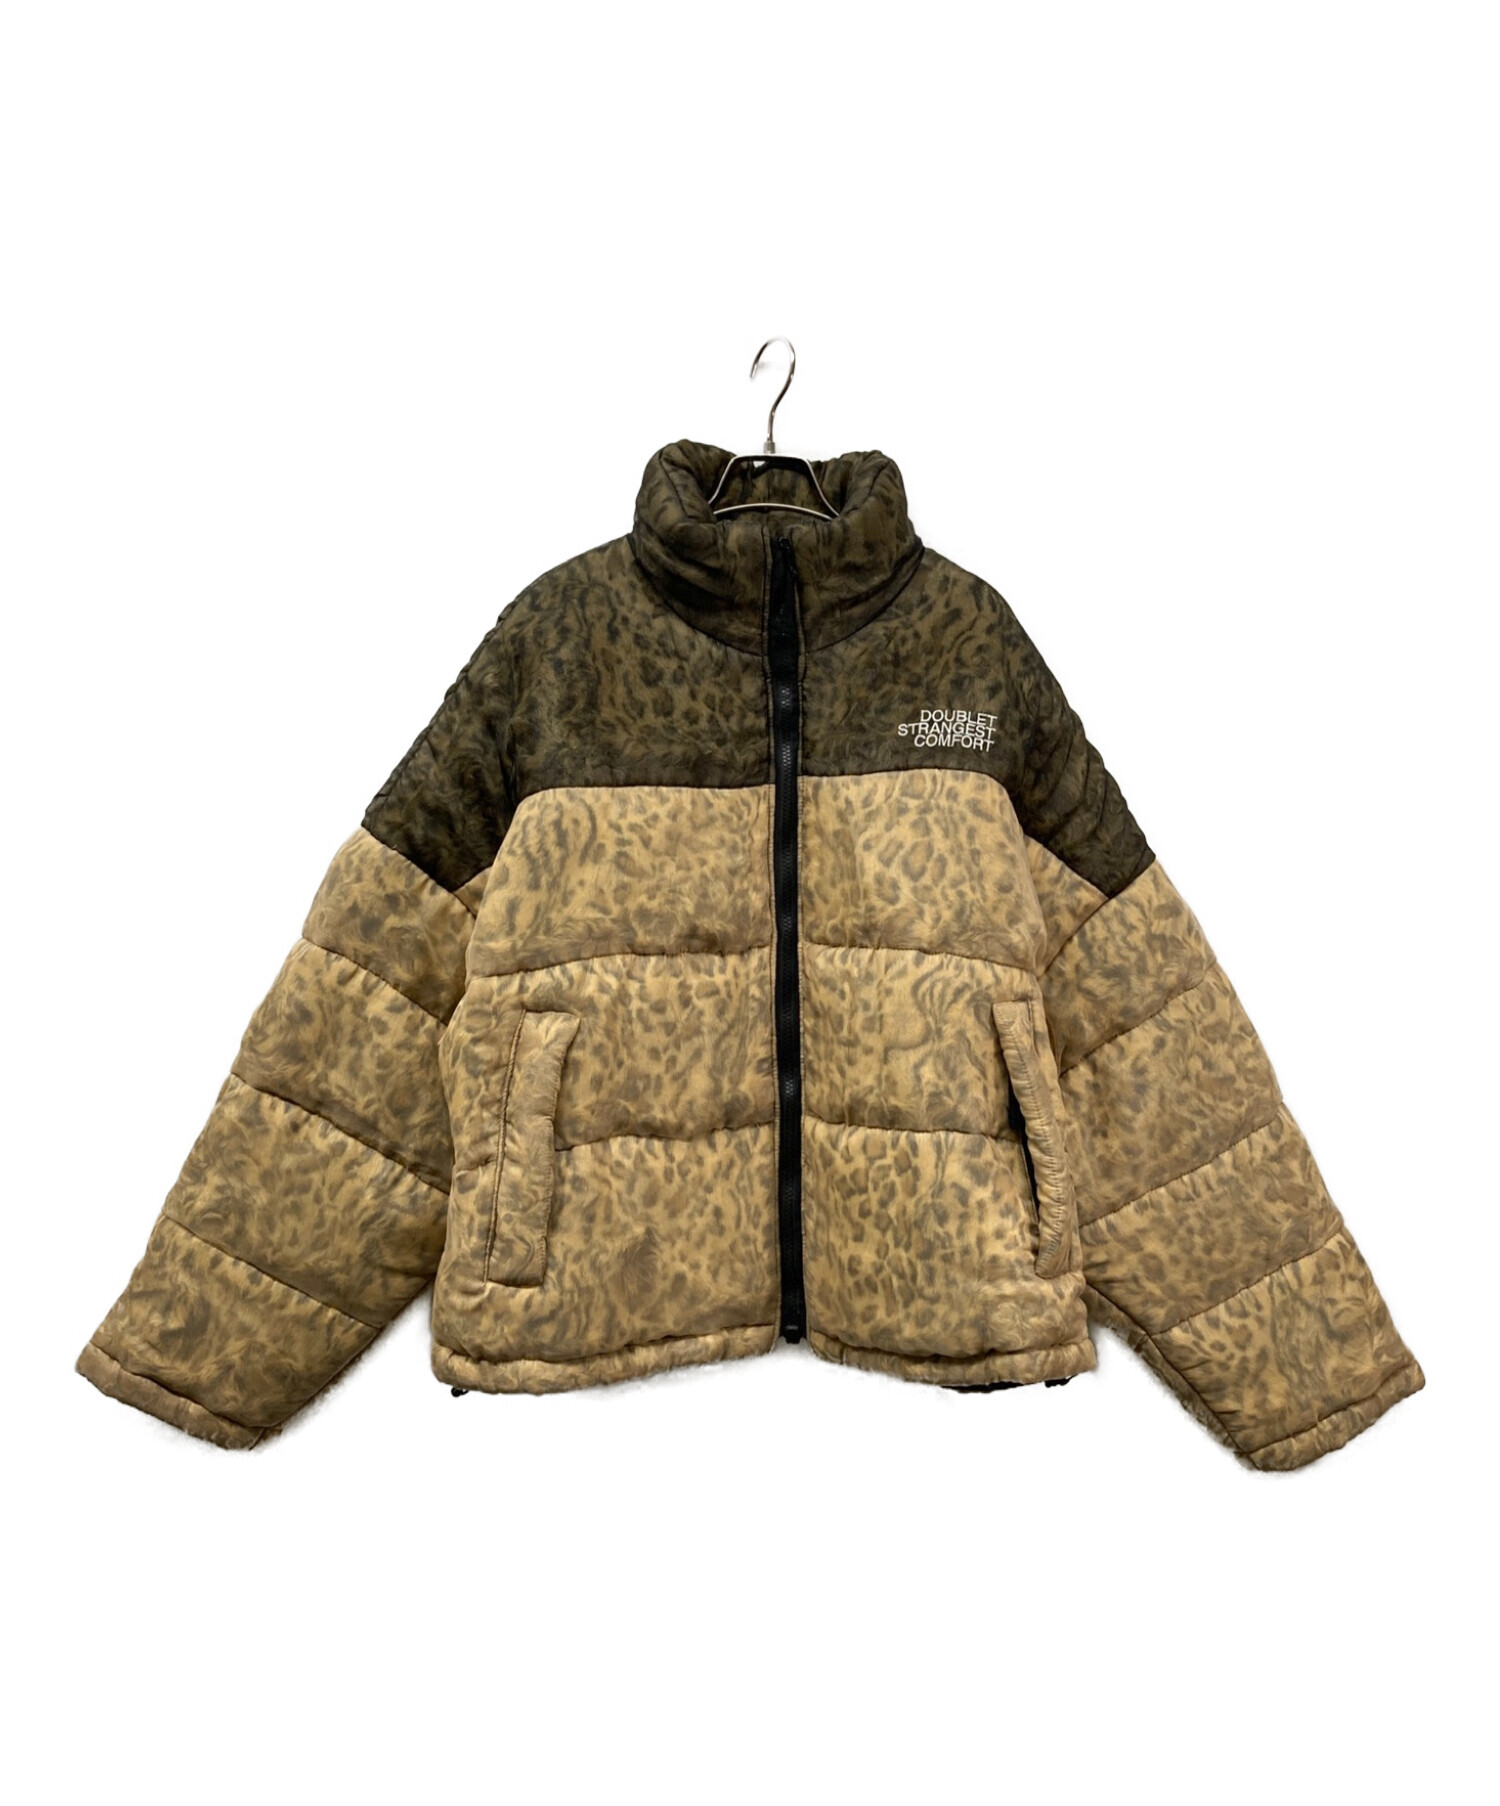 doublet (ダブレット) ORGANDIE WRAPPED PUFFER JACKET 22AW10BL145 フェイクファー中綿ジャケット  ベージュ サイズ:-